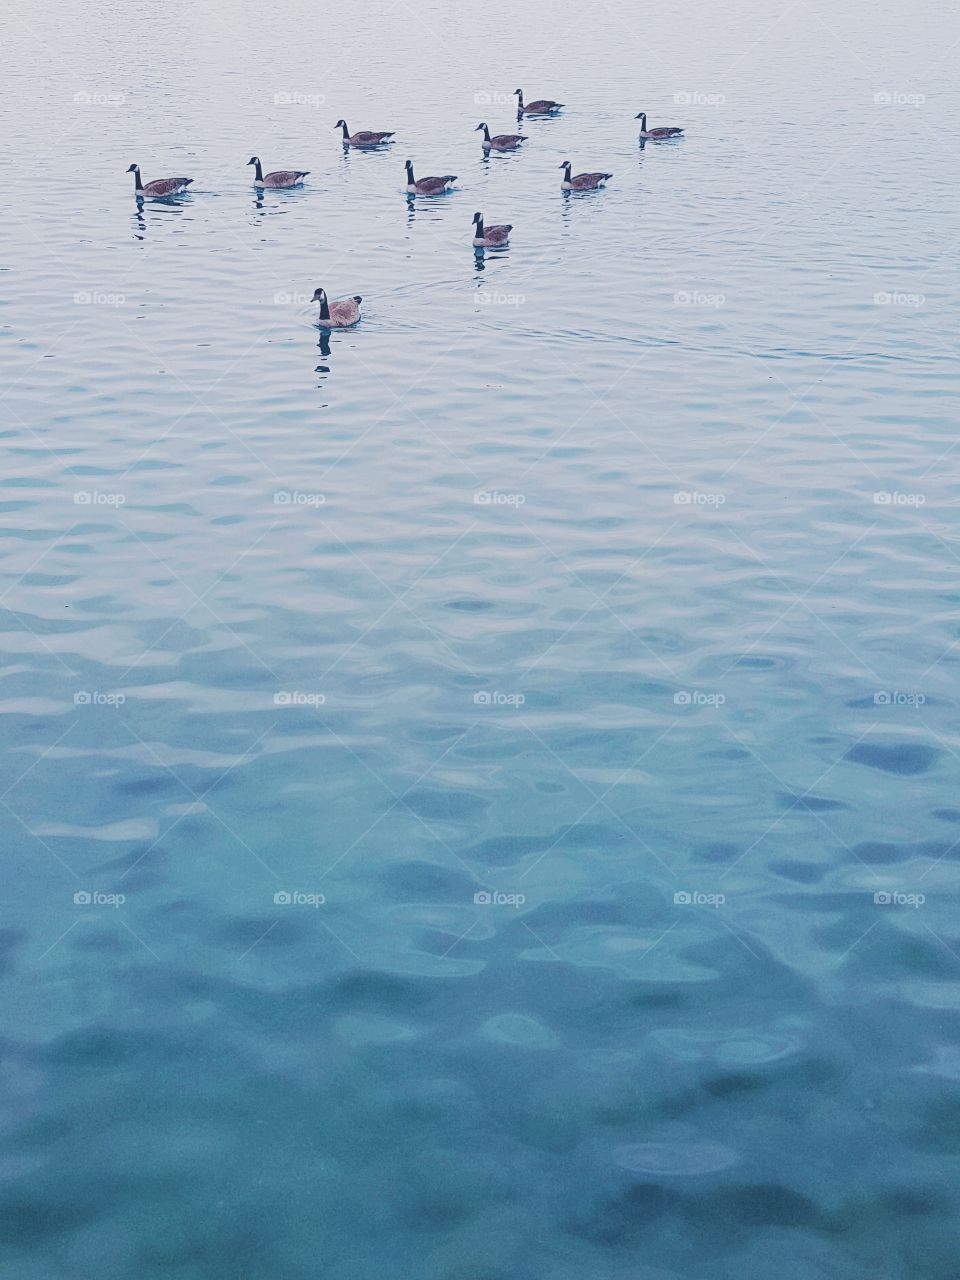 A gaggle of Canadian geese swim through calm water.